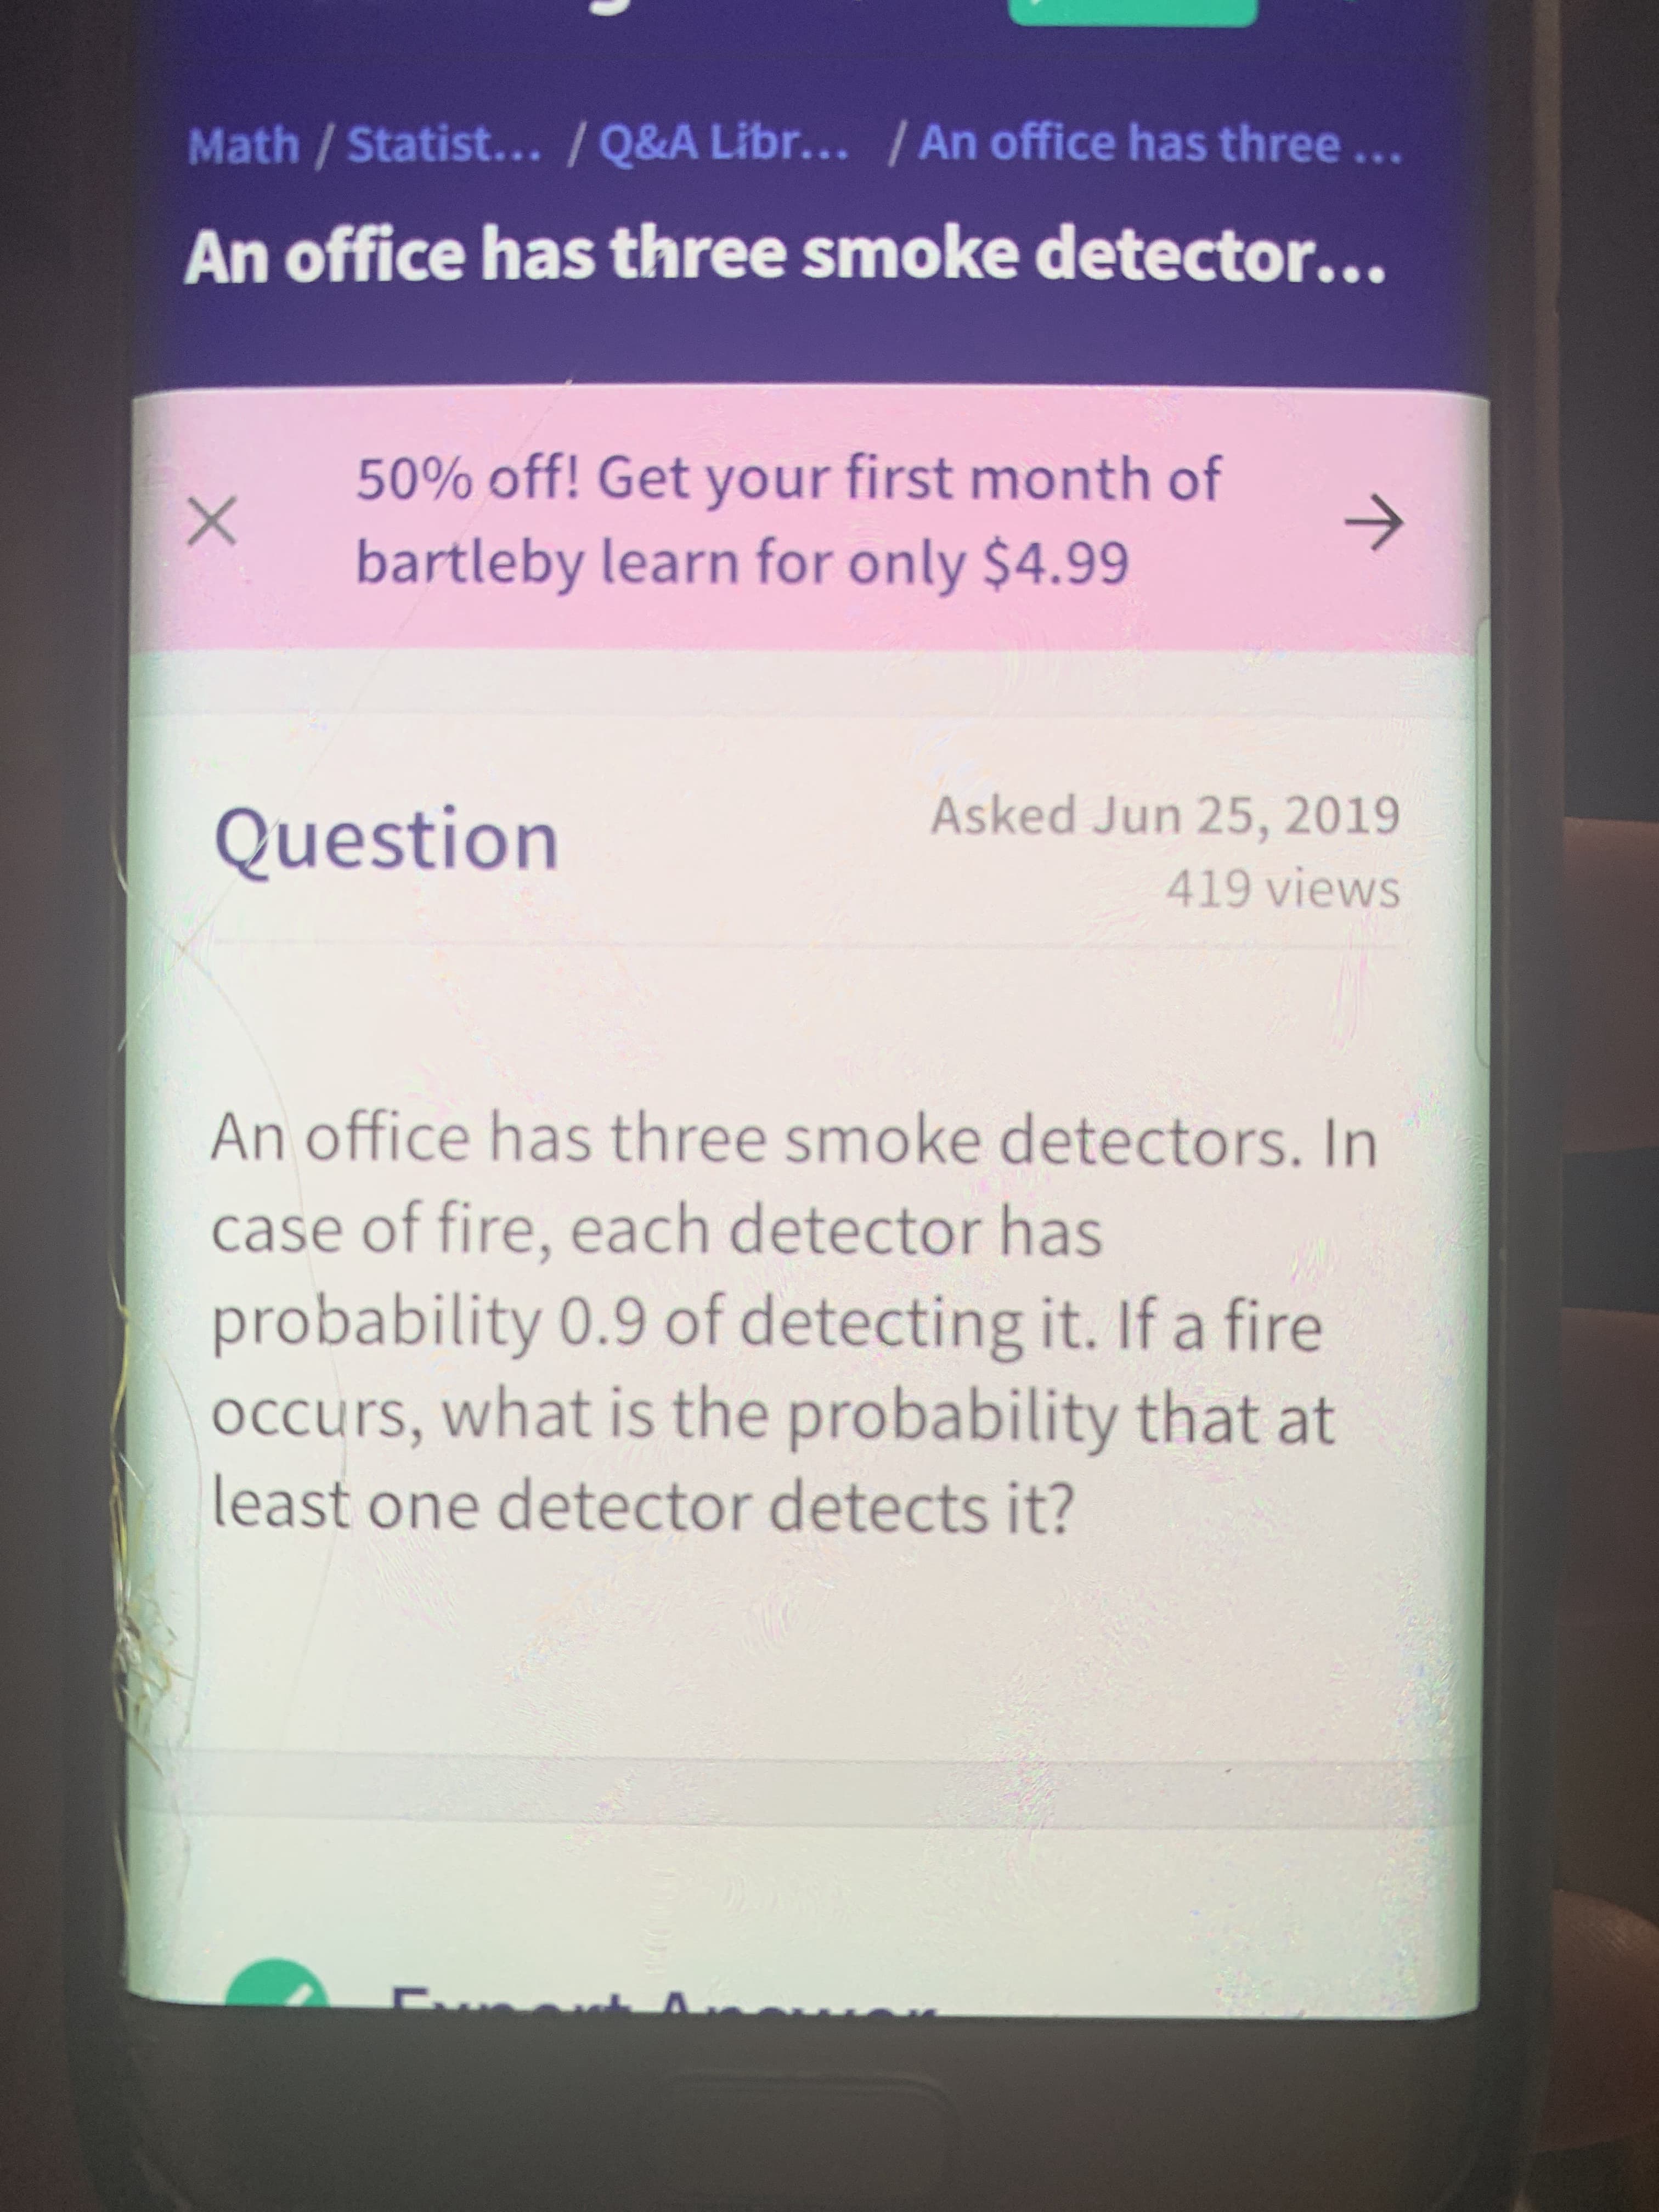 An office has three smoke detectors. In
case of fire, each detector has
probability 0.9 of detecting it. If a fire
occurs, what is the probability that at
least one detector detects it?
